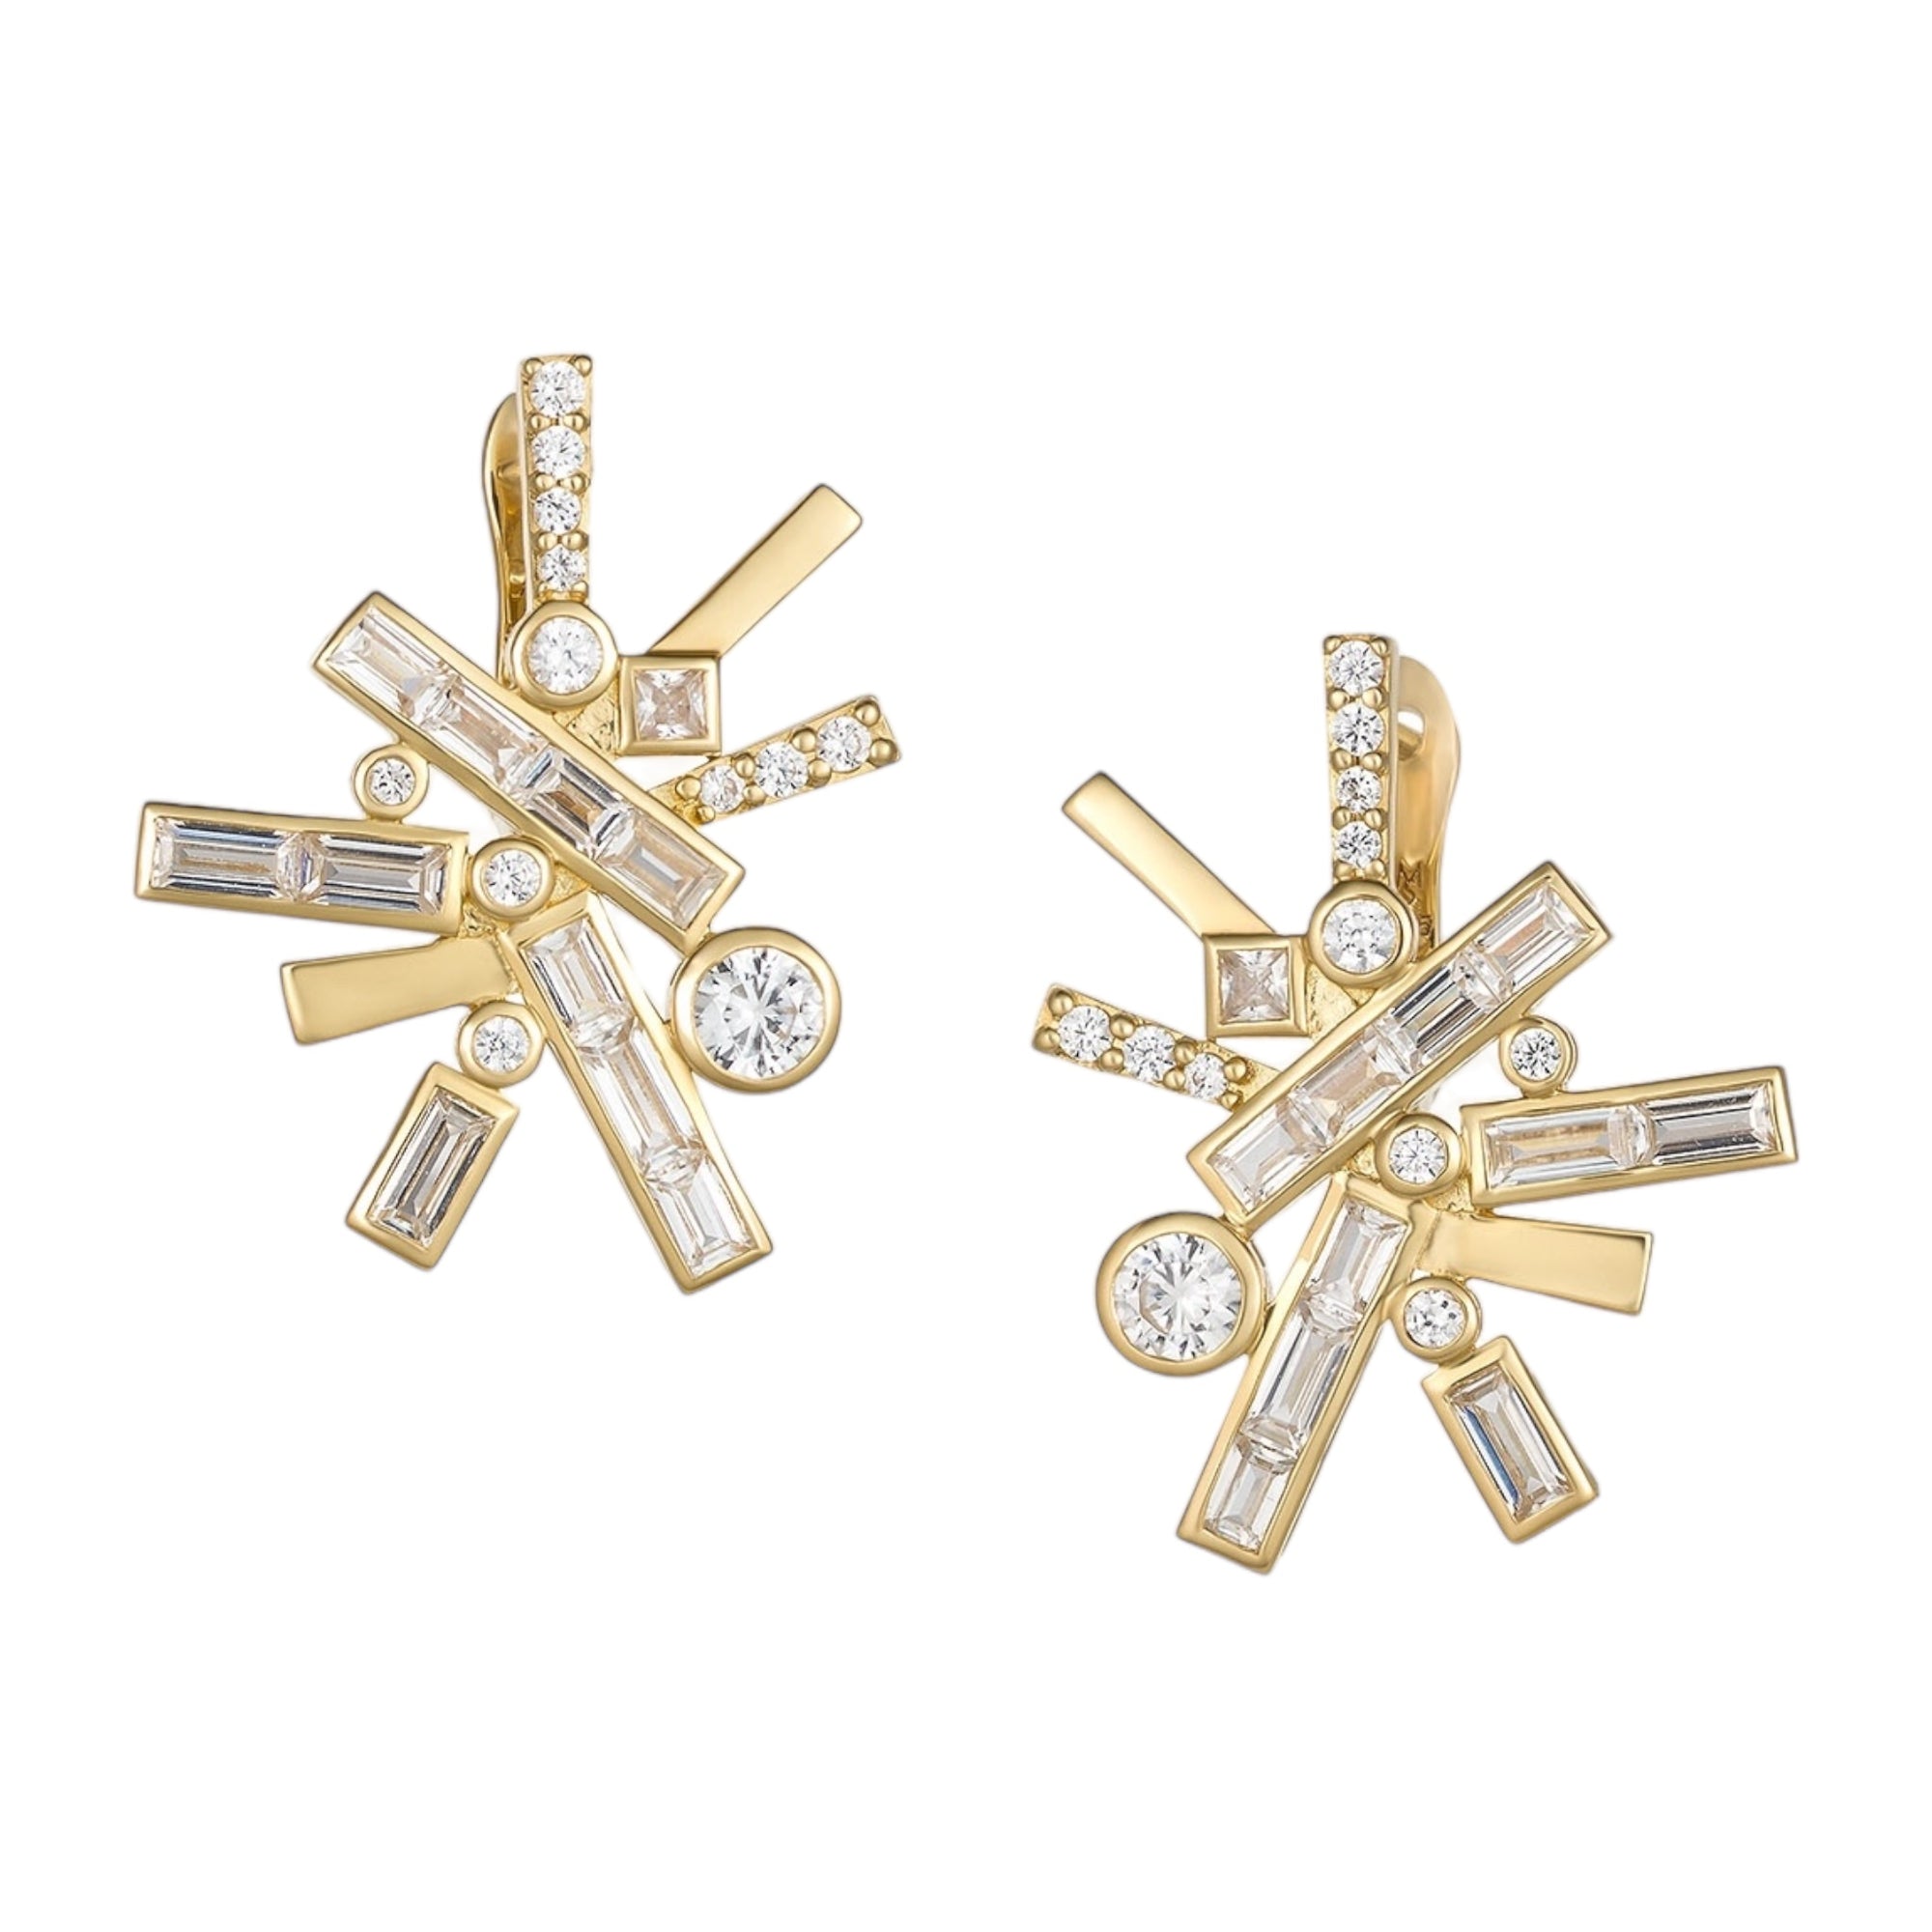 Starburst Zircon Earrings by Martha Seely available at Talisman Collection Fine Jewelers in El Dorado Hills, CA and online. Stats: Transform your everyday look into a celebration with the dazzling addition of this sparkler on your ear. Featuring 3.28 carats of natural Zircons in a stunning mix of bezel set and pave stones, these earrings are meticulously crafted in 14k yellow gold and measure 25 x 21mm. The secure omega back ensures a stylish and safe fit. 